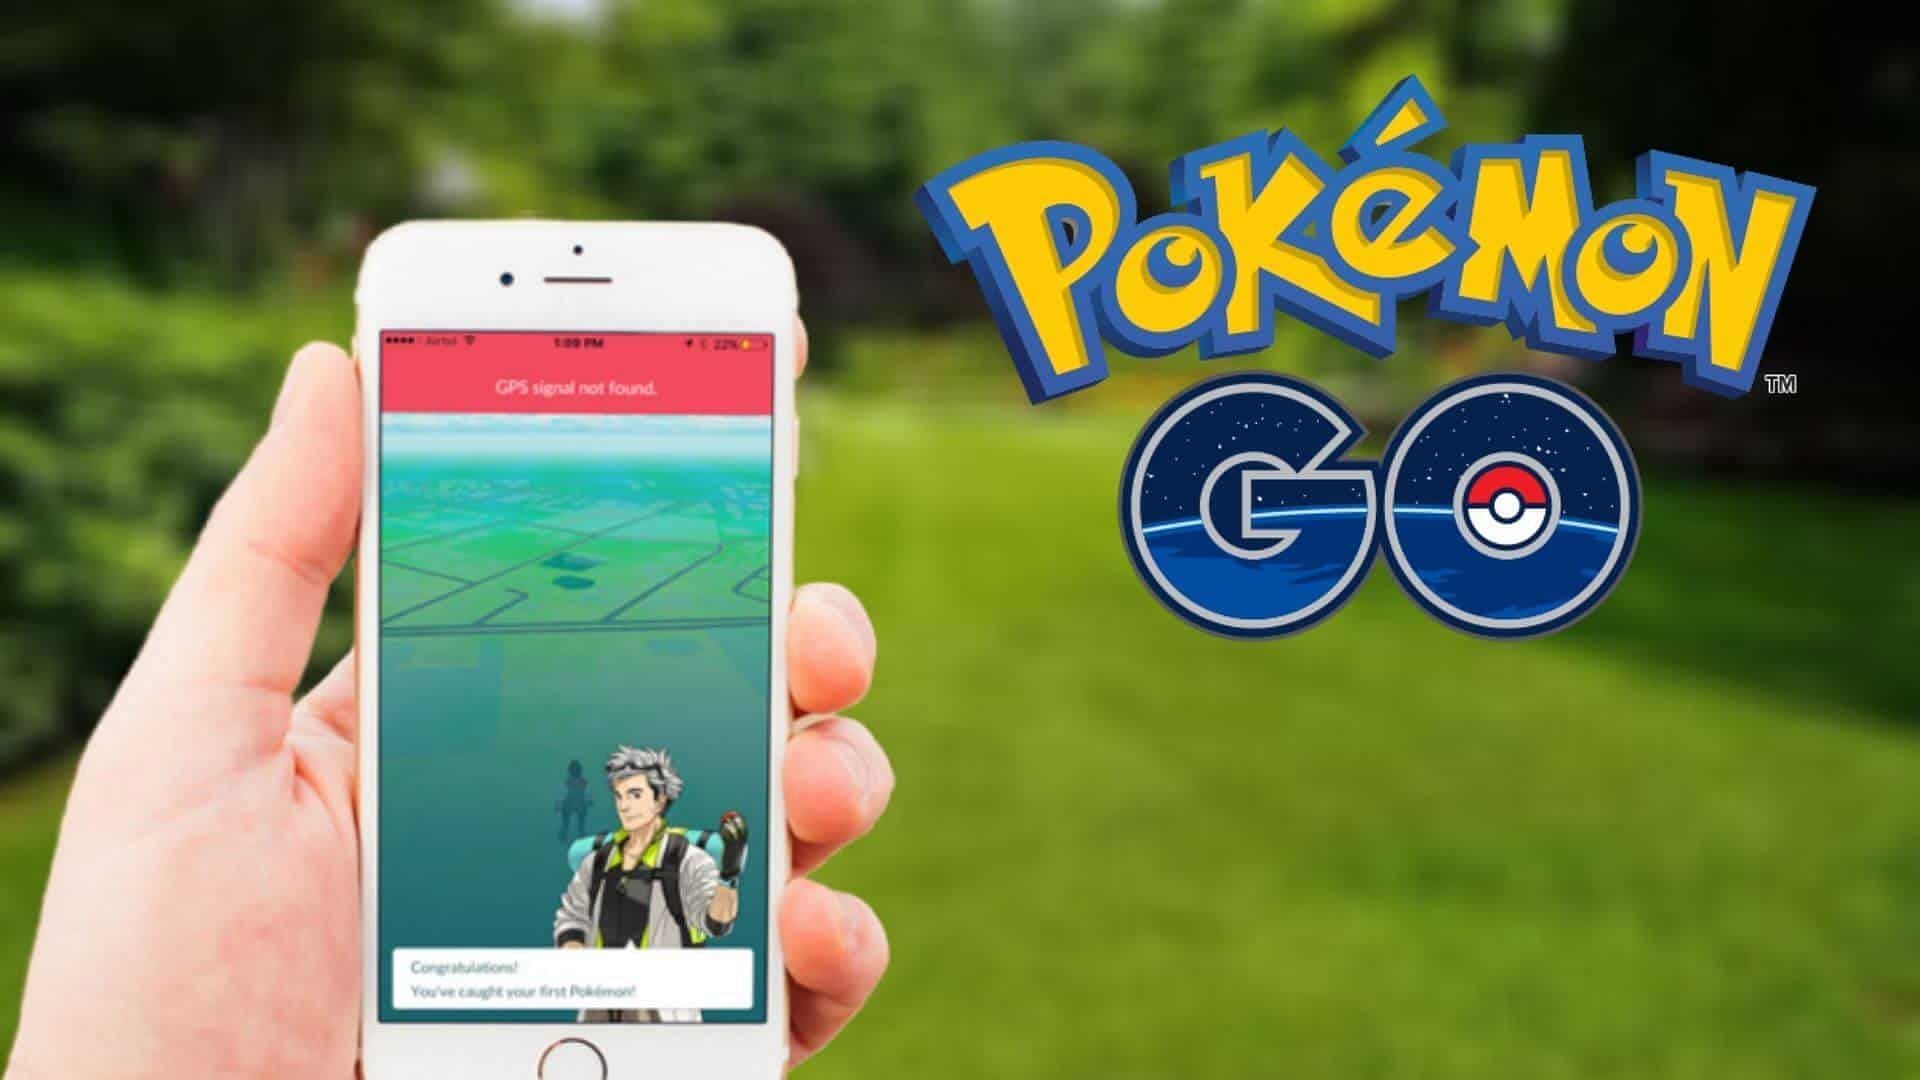 Pokemon GO "GPS signal not found" error How to fix, possible reasons